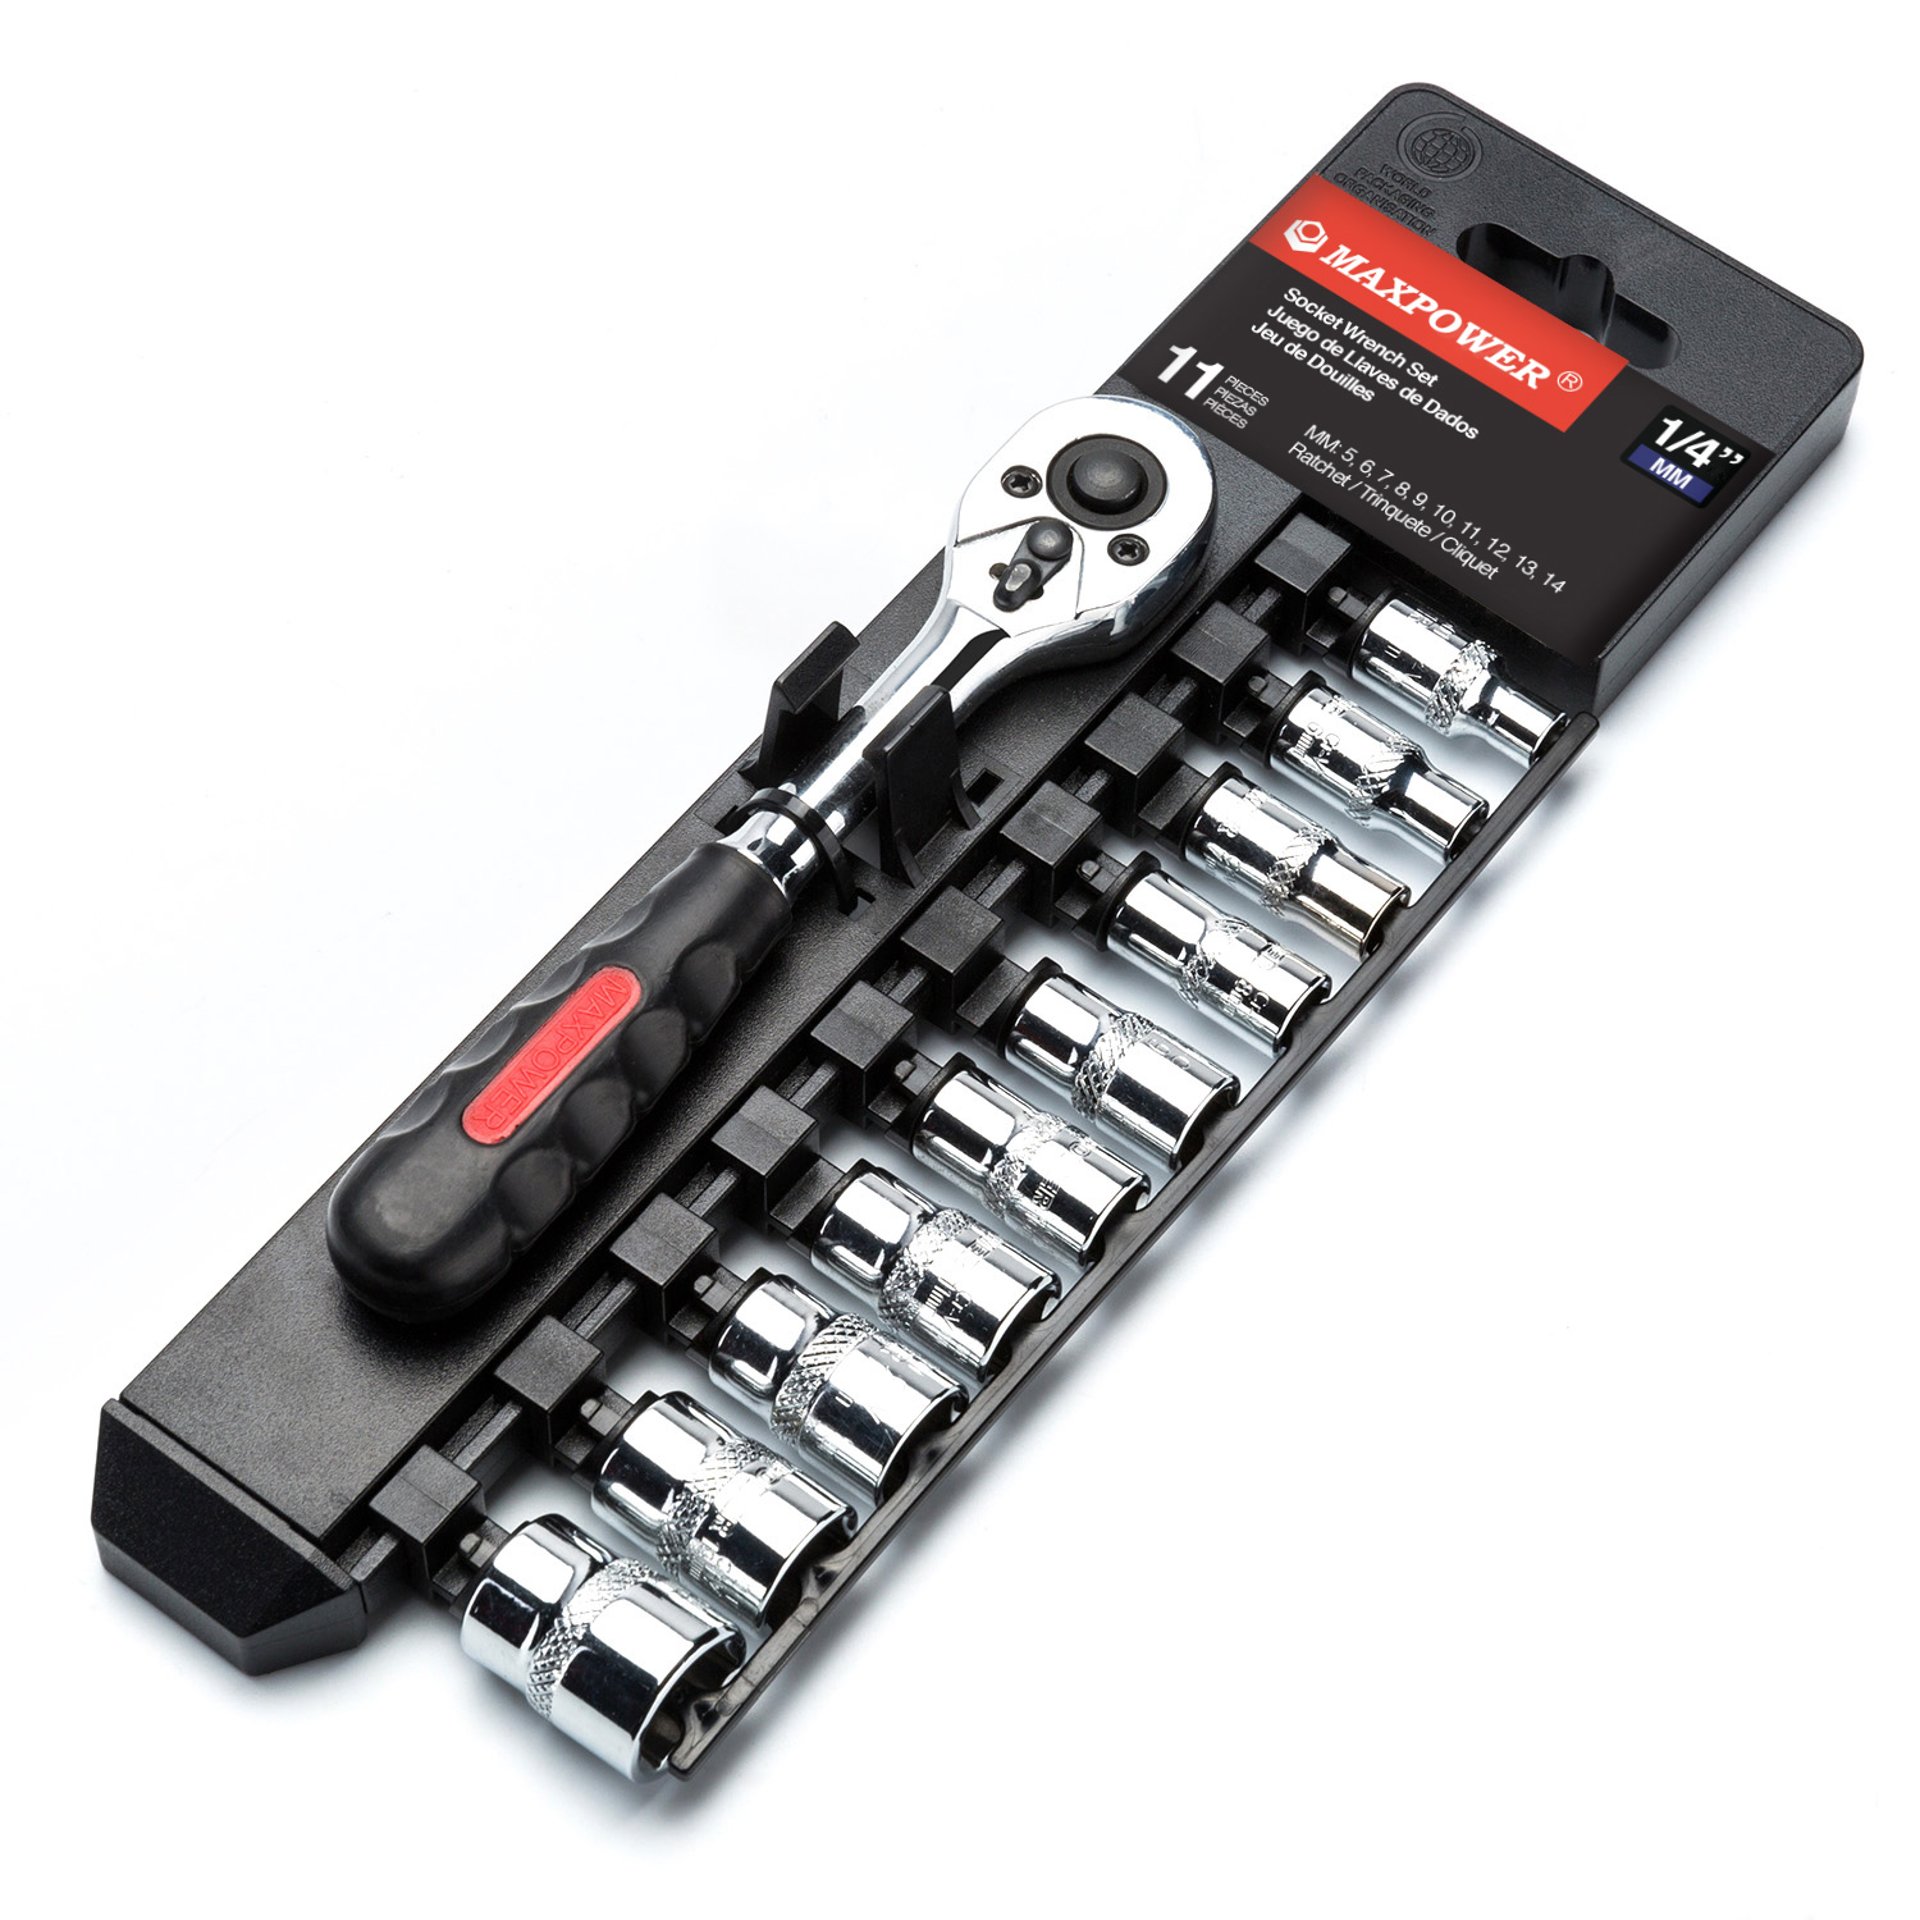 MAXPOWER 11-Piece Metric 1/4-inch Socket Wrench Set